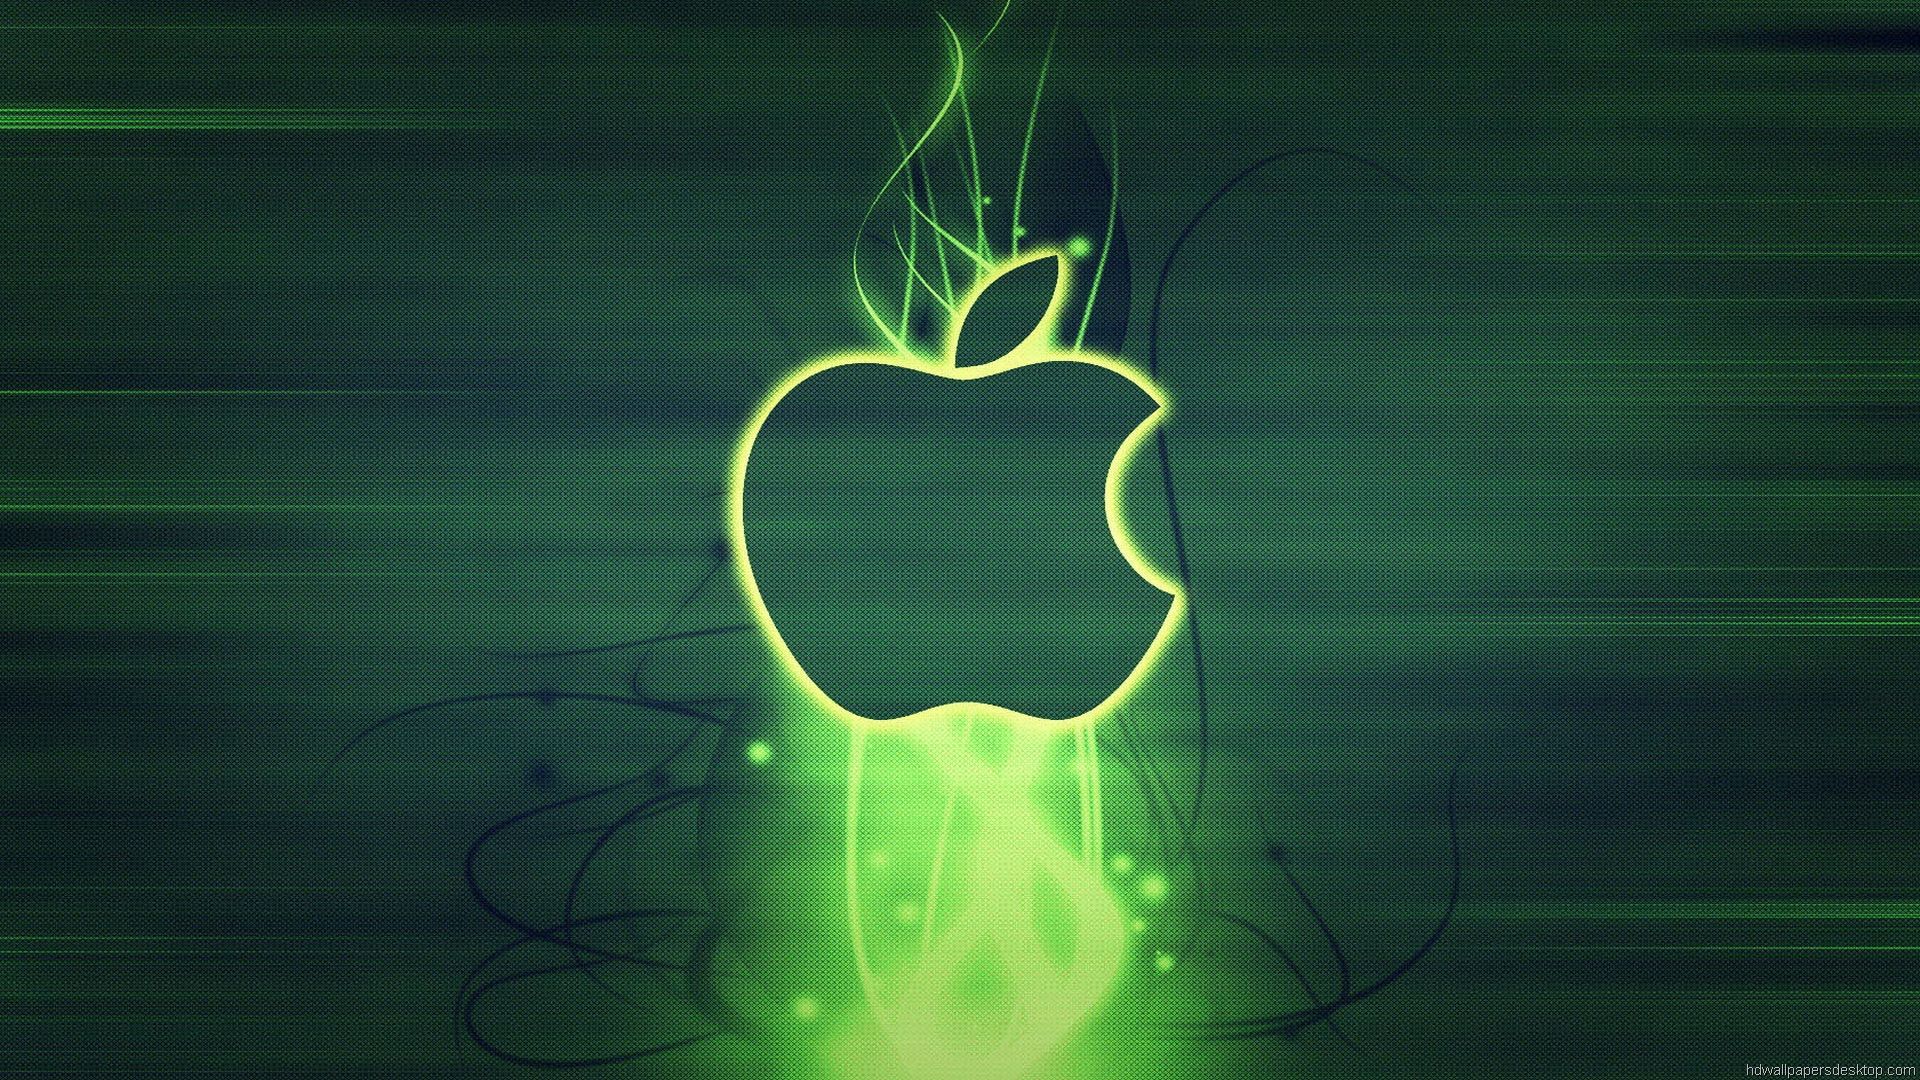 Green Apple Wallpapers | Apple Wallpapers For Desktop and Laptop ...